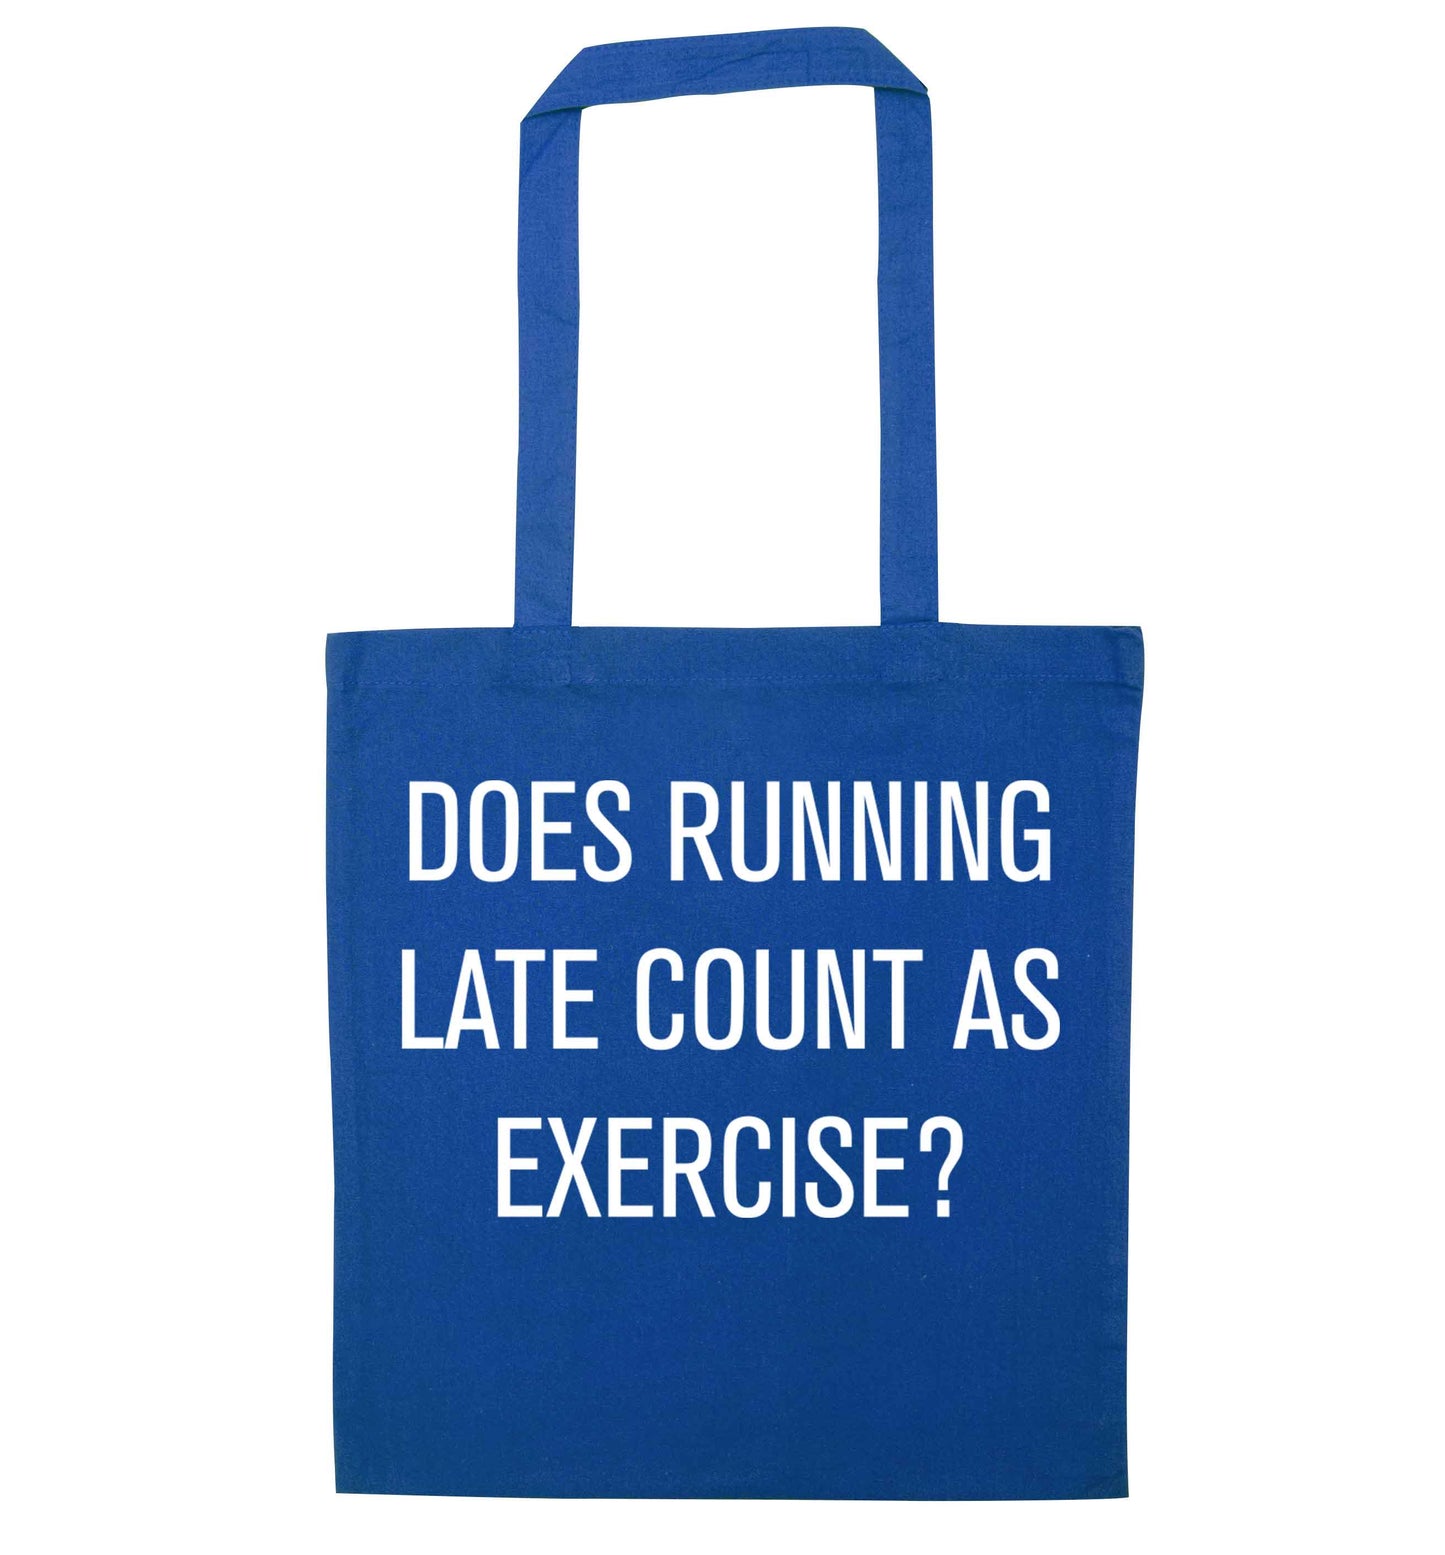 Does running late count as exercise? blue tote bag